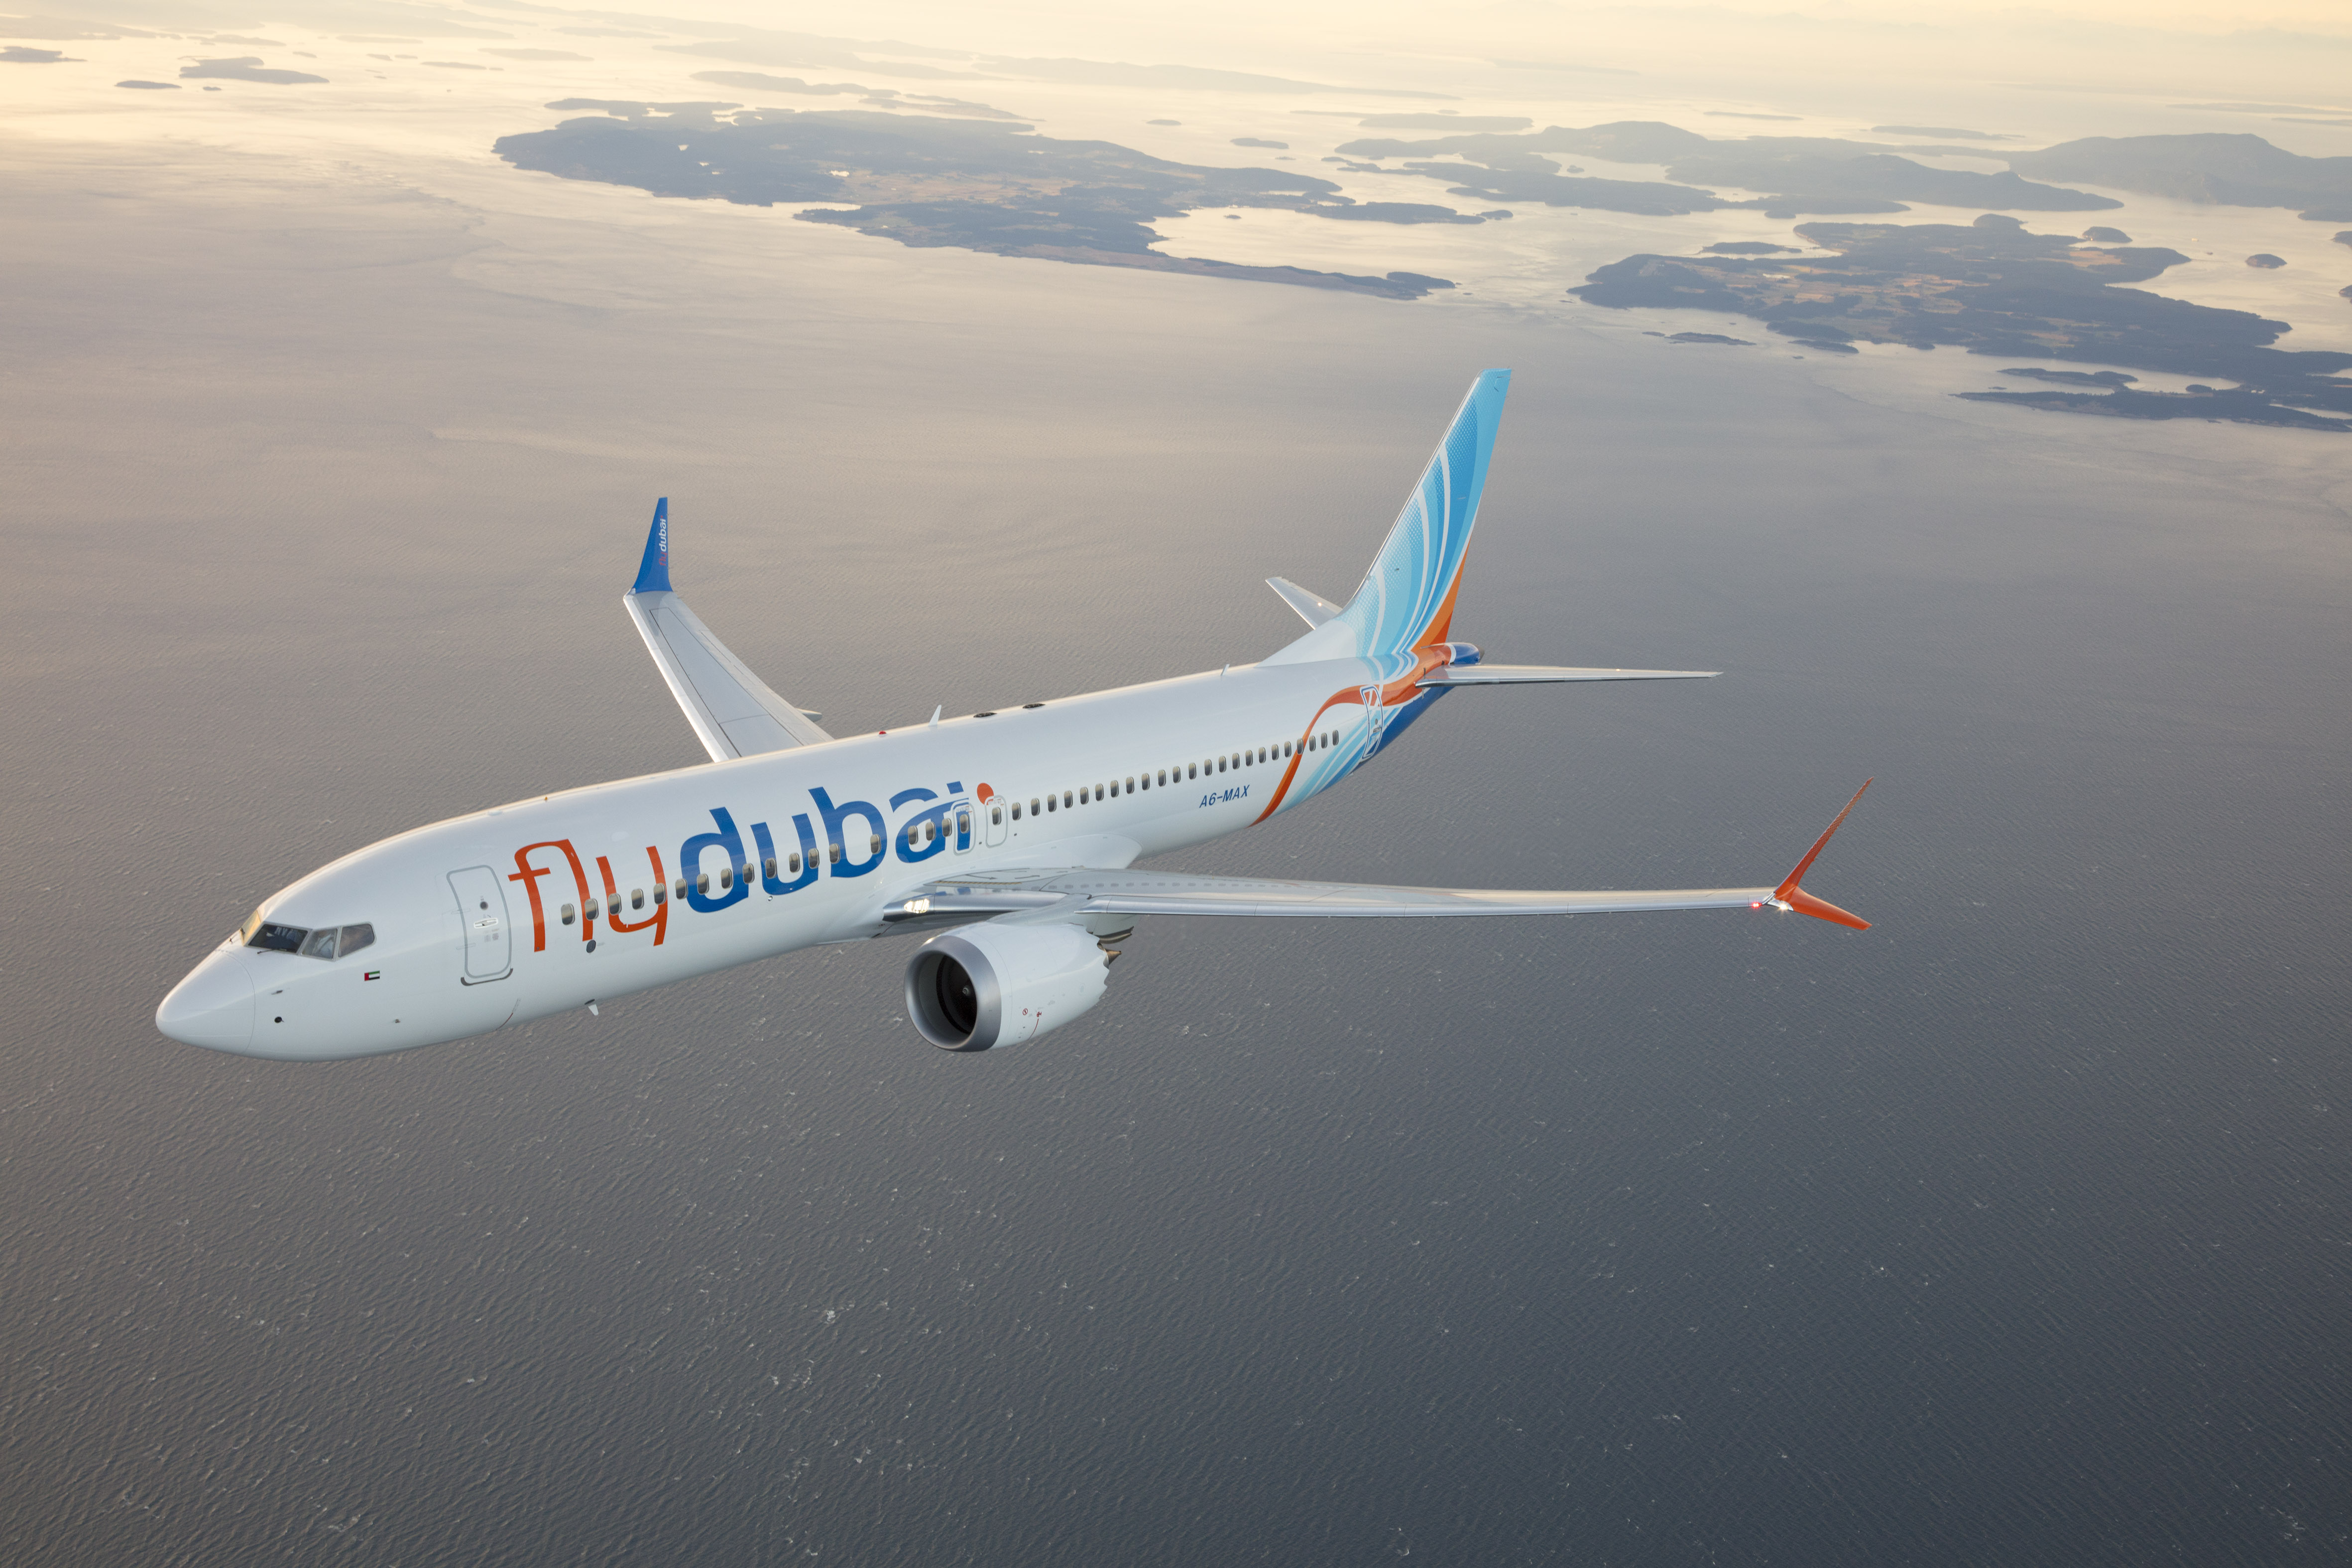 flydubai launches flights to Pakistan’s Lahore and Islamabad